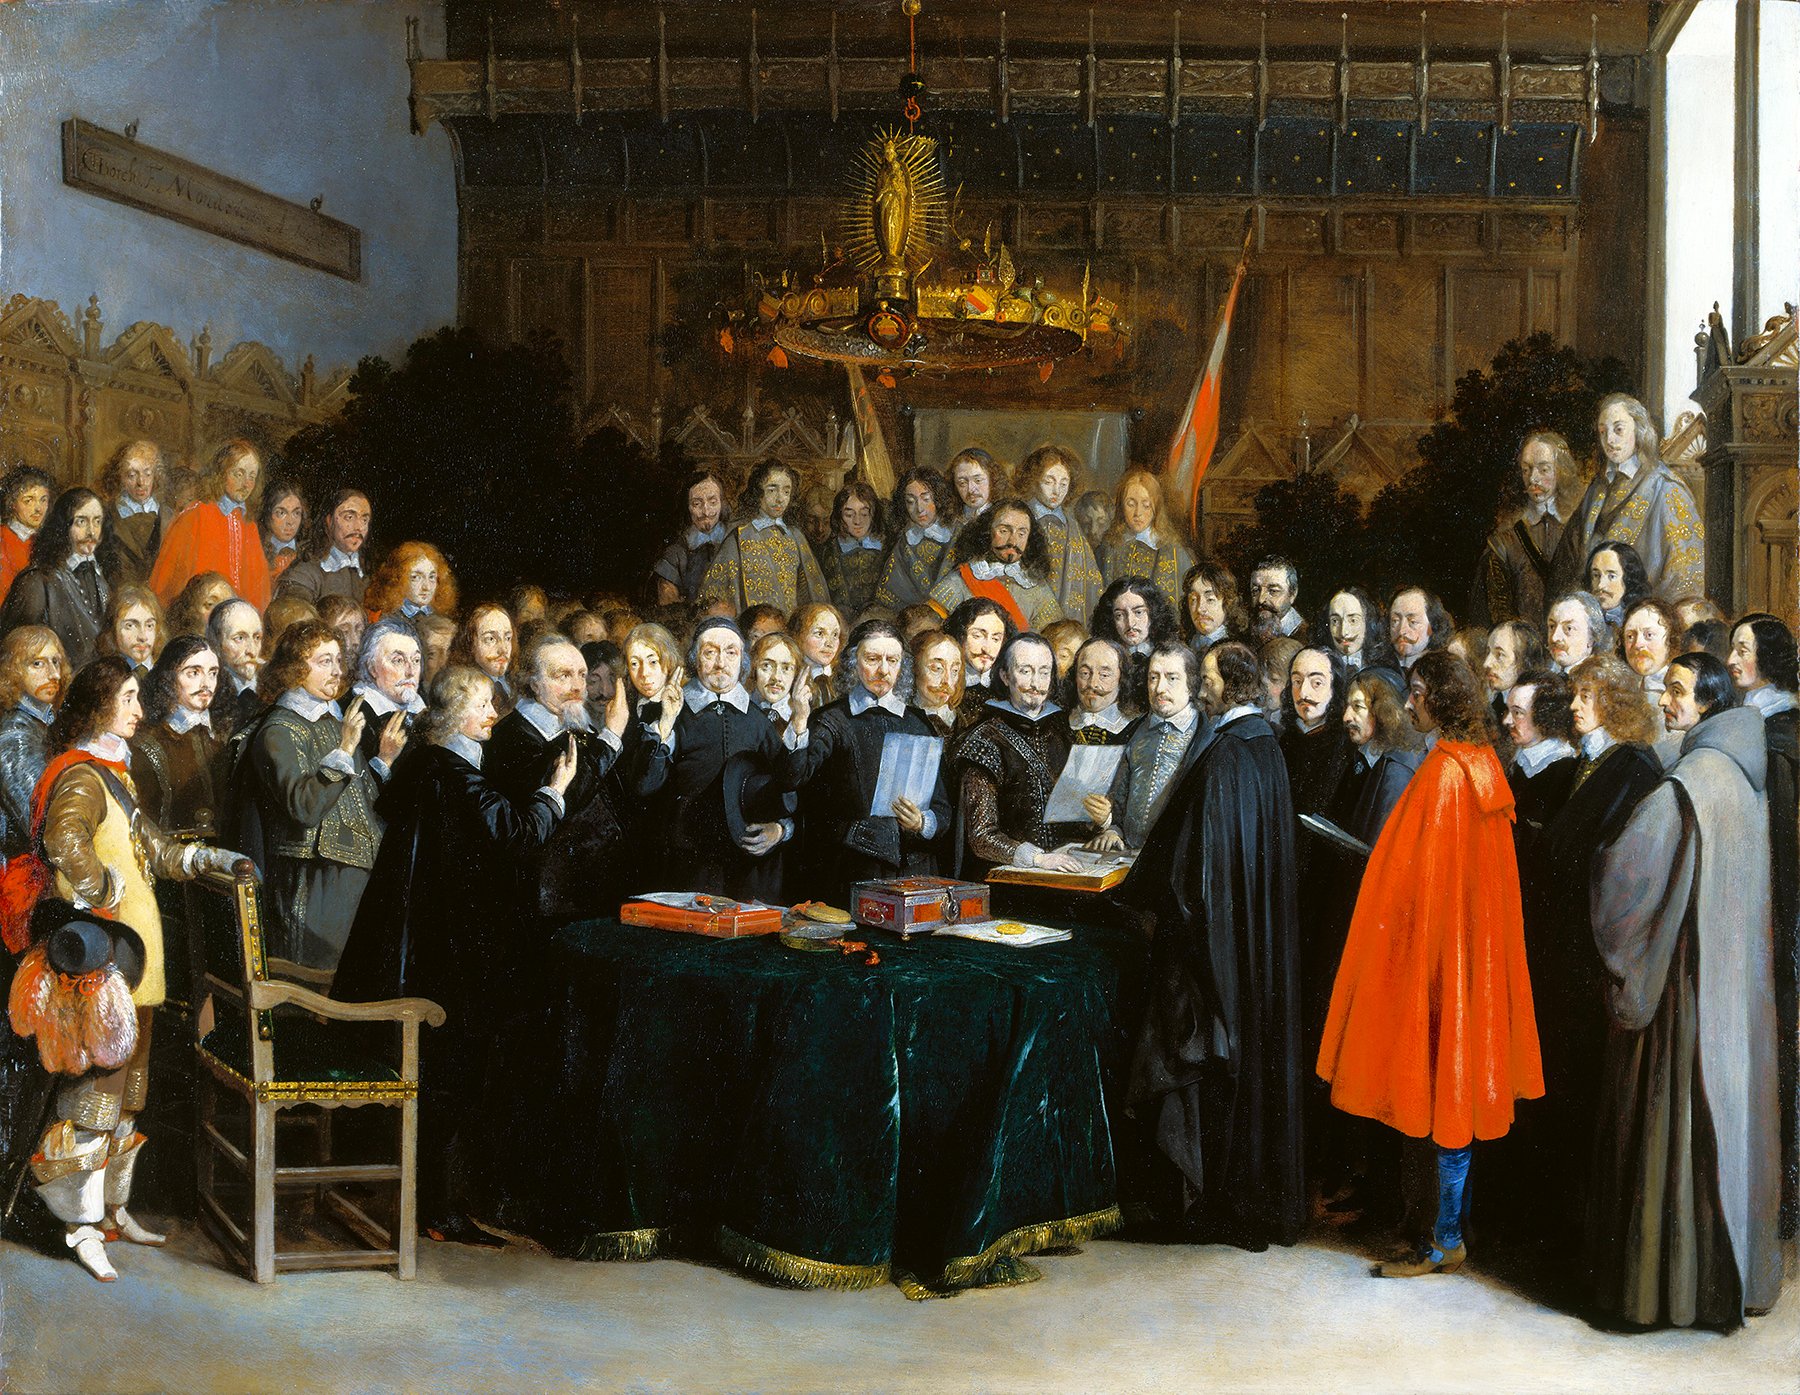 A detailed painting depicting the Ratification of the Spanish-Dutch Treaty of Münster on 15 May 1648. A large assembly of dignitaries, diplomats, and officials gather in a grand room with intricate woodwork and chandeliers. Central to the scene is a table draped in green cloth, where documents await ratification. Several figures are engaged in discussion or reading, while others solemnly observe. Two prominently dressed figures, one in a vibrant red cloak and another in an ornate armor, stand out among the gathering. The atmosphere is one of solemnity and significance, capturing the historic moment of treaty ratification.